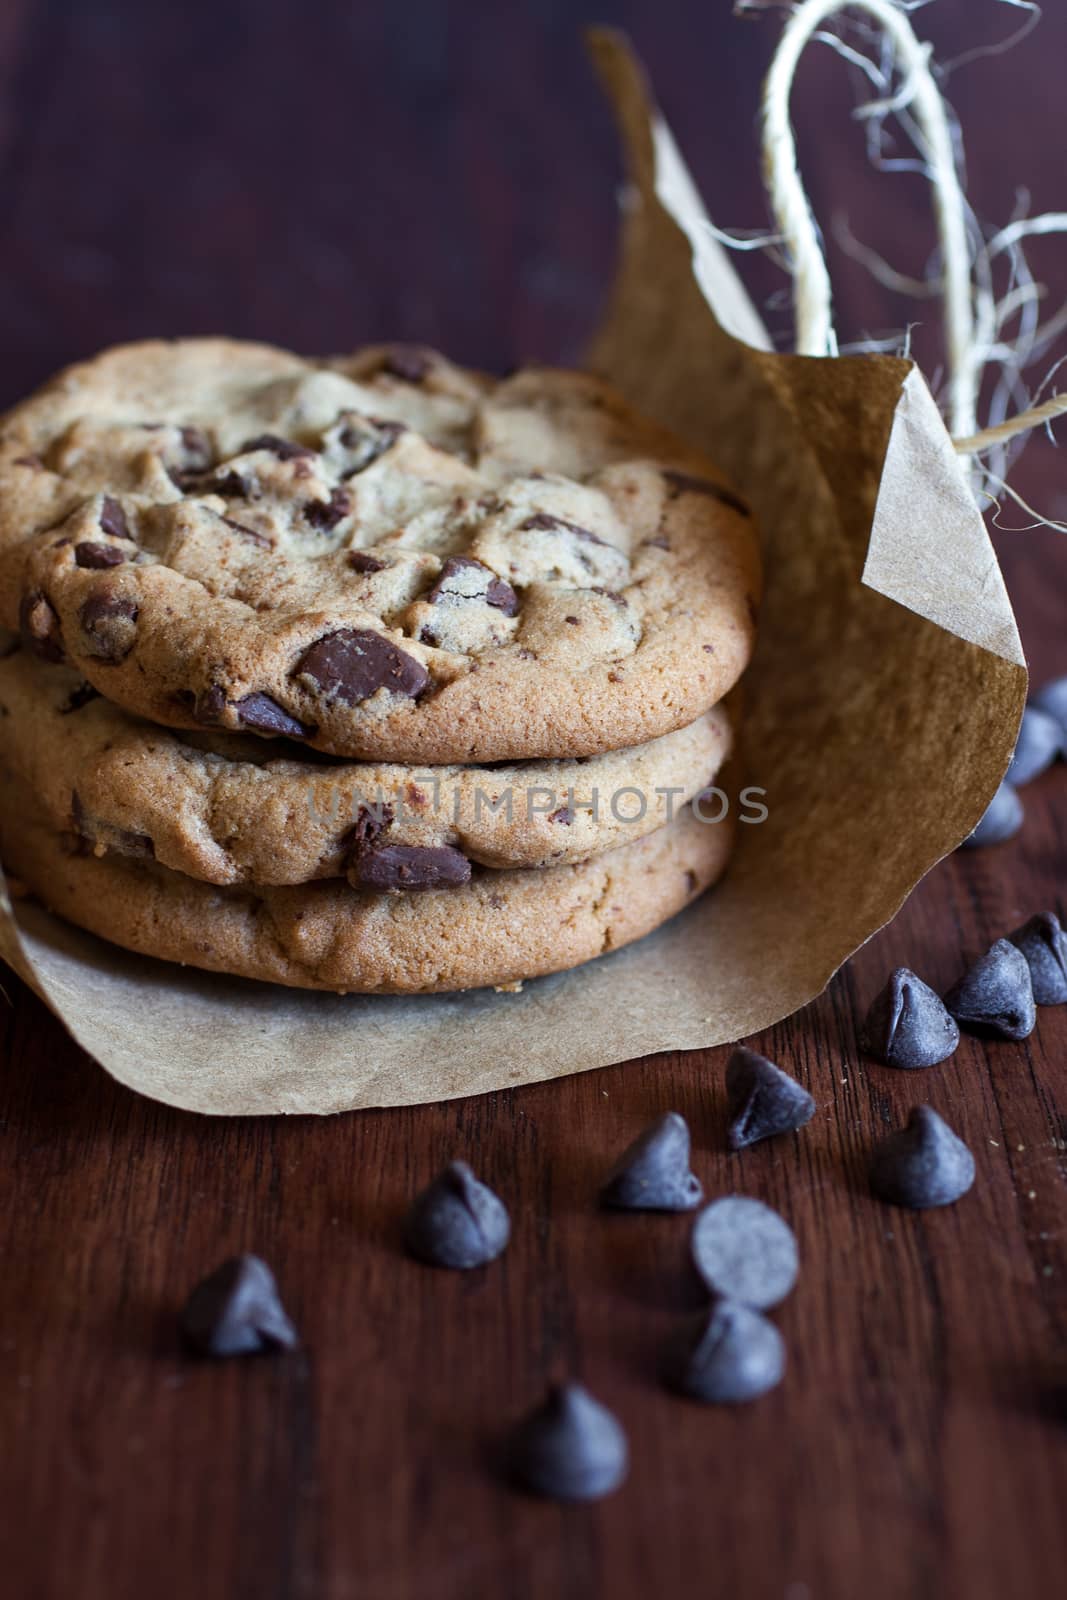 Chocolate Chunk Cookies by SouthernLightStudios